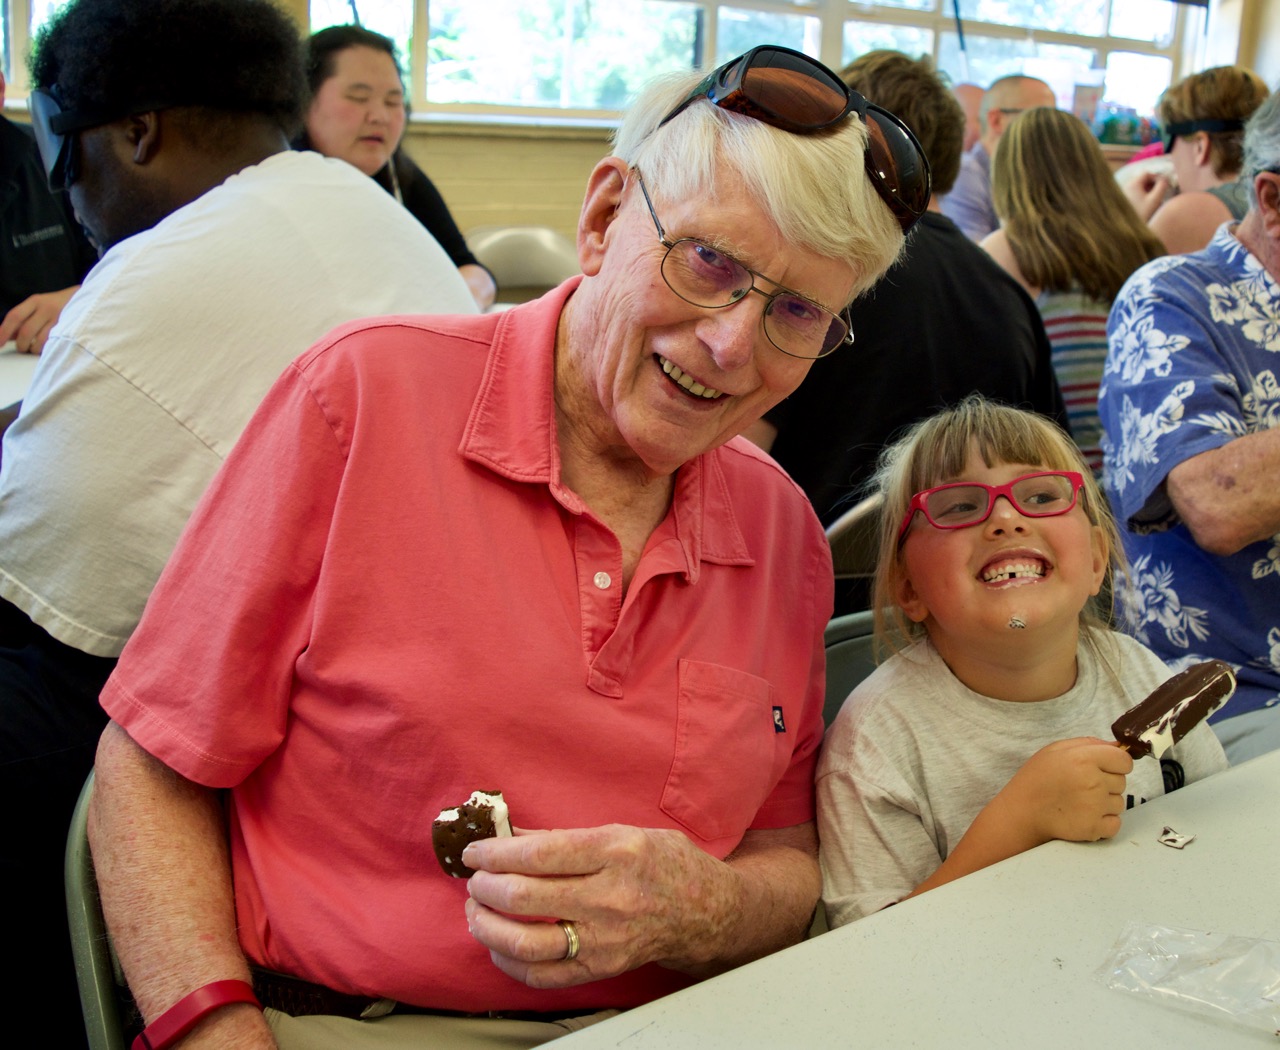 A man in his eighties sits beside a 6-year-old girl, both enjoying ice cream